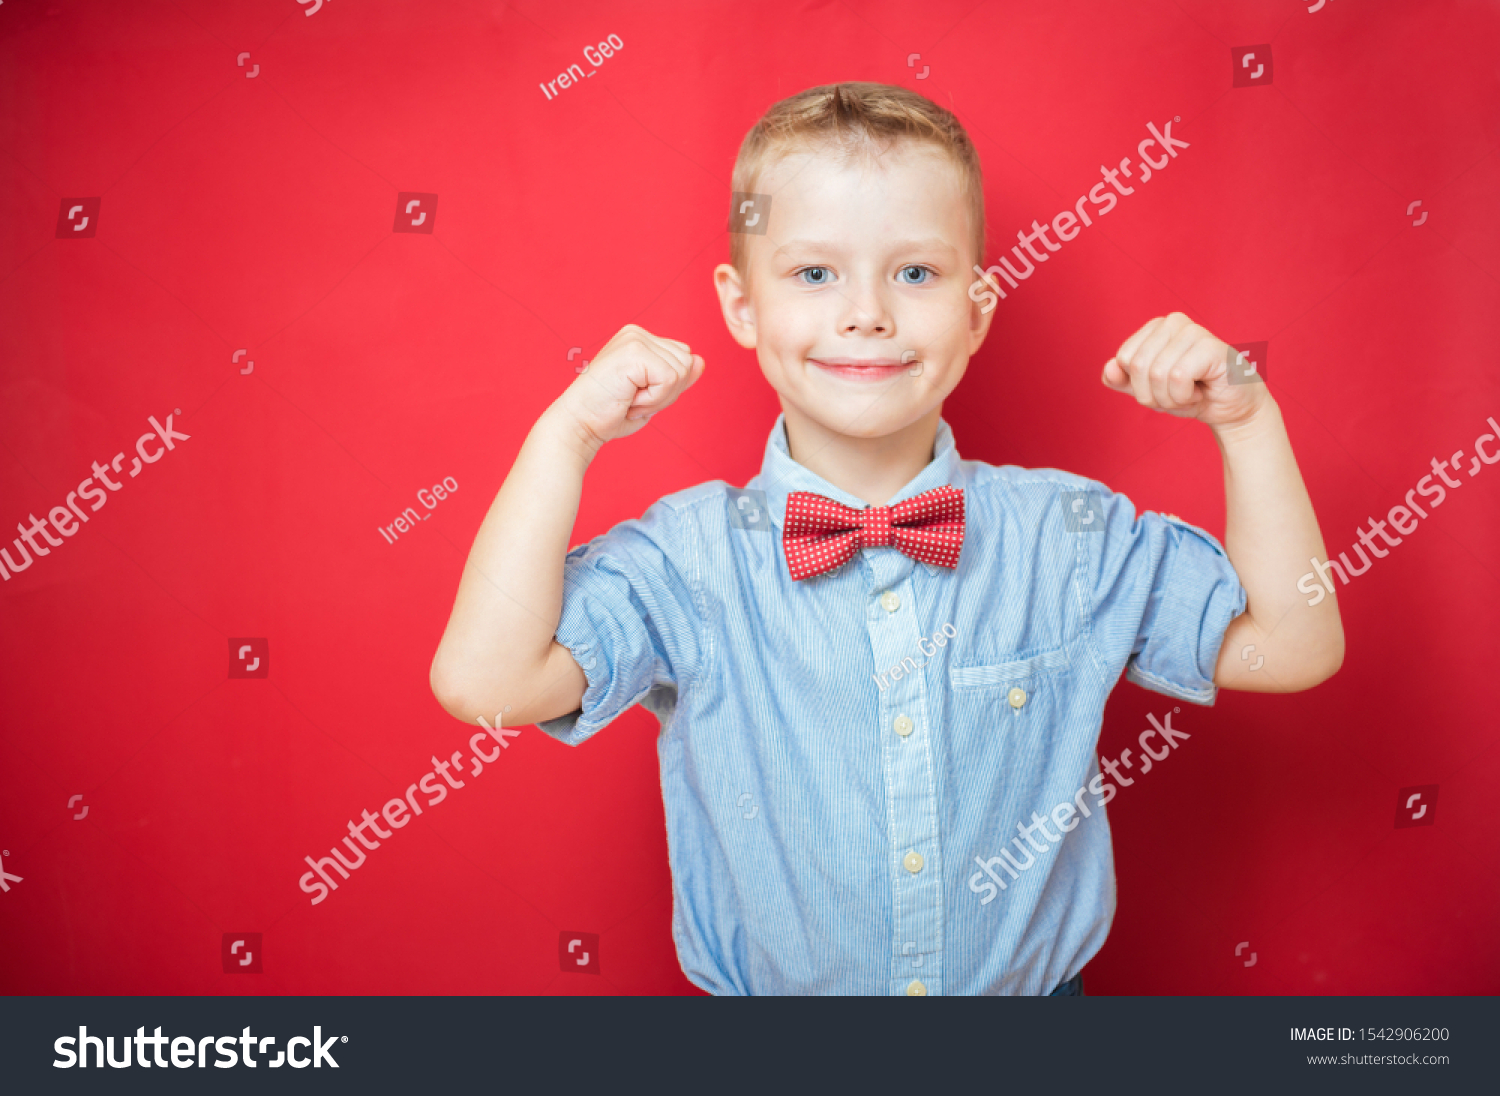 Portrait Strong Boy Showing Muscles His Stock Photo 1542906200 ...